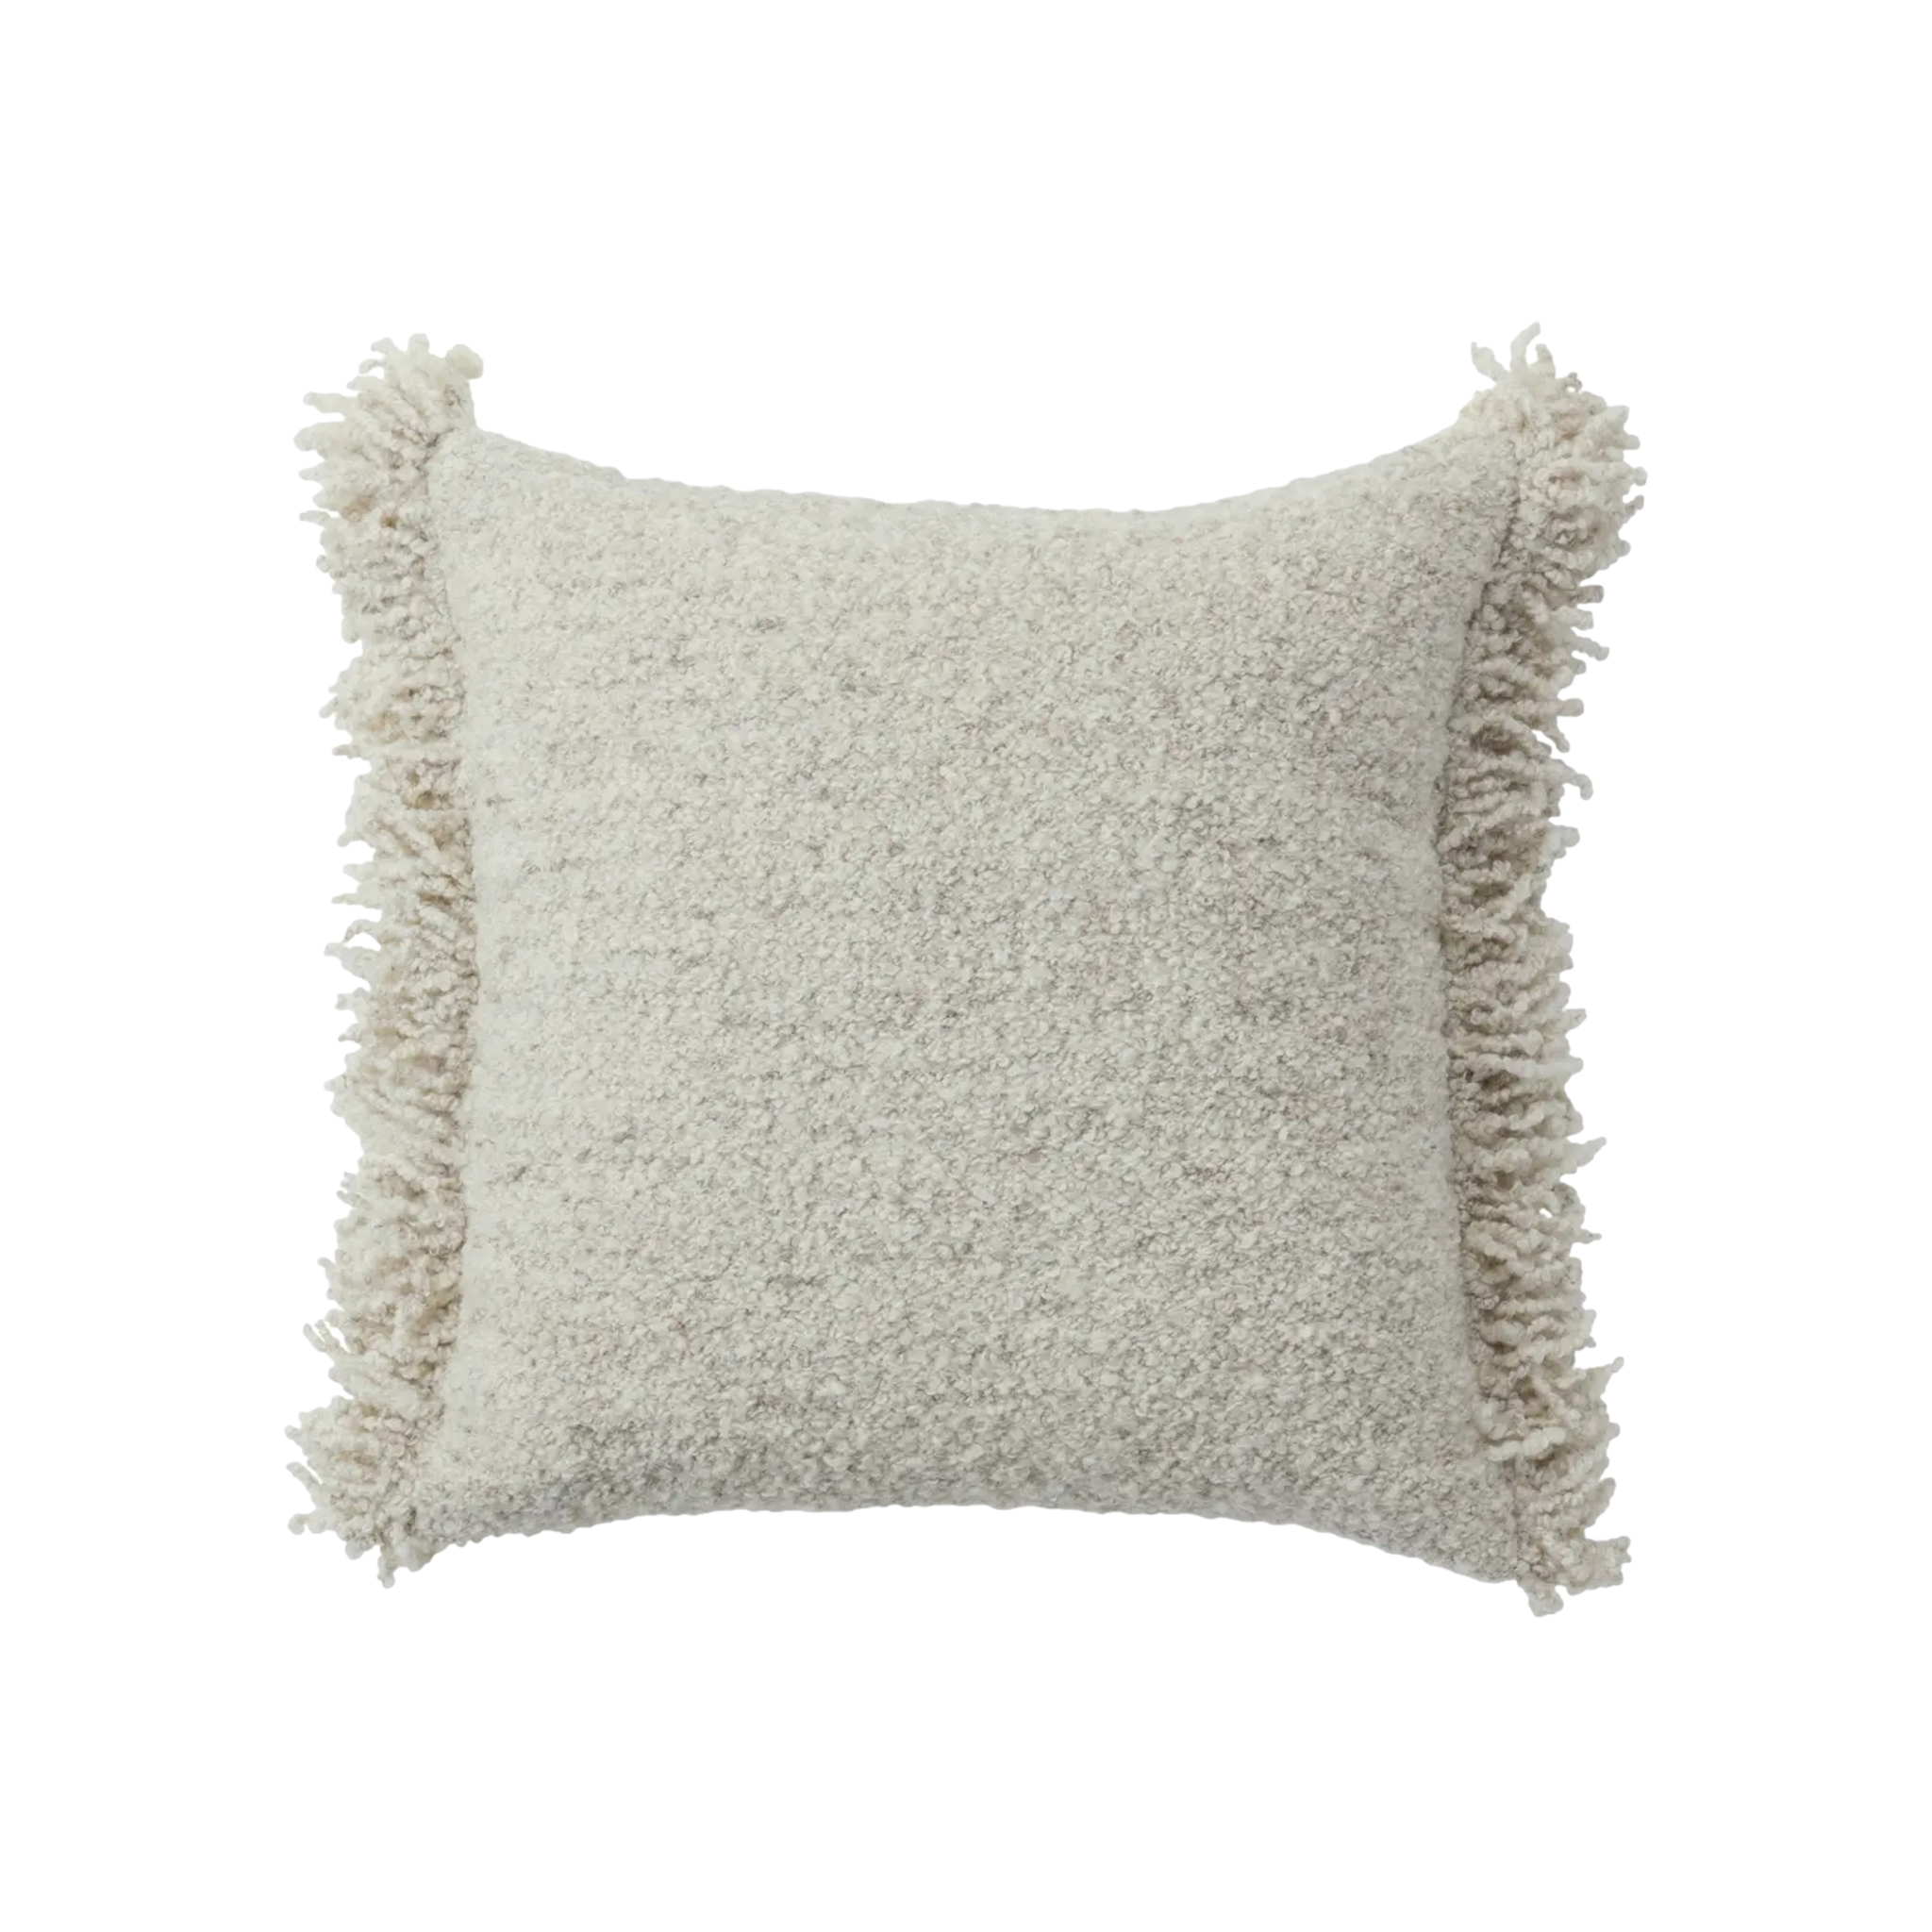 Kinsey Pillow in Grey